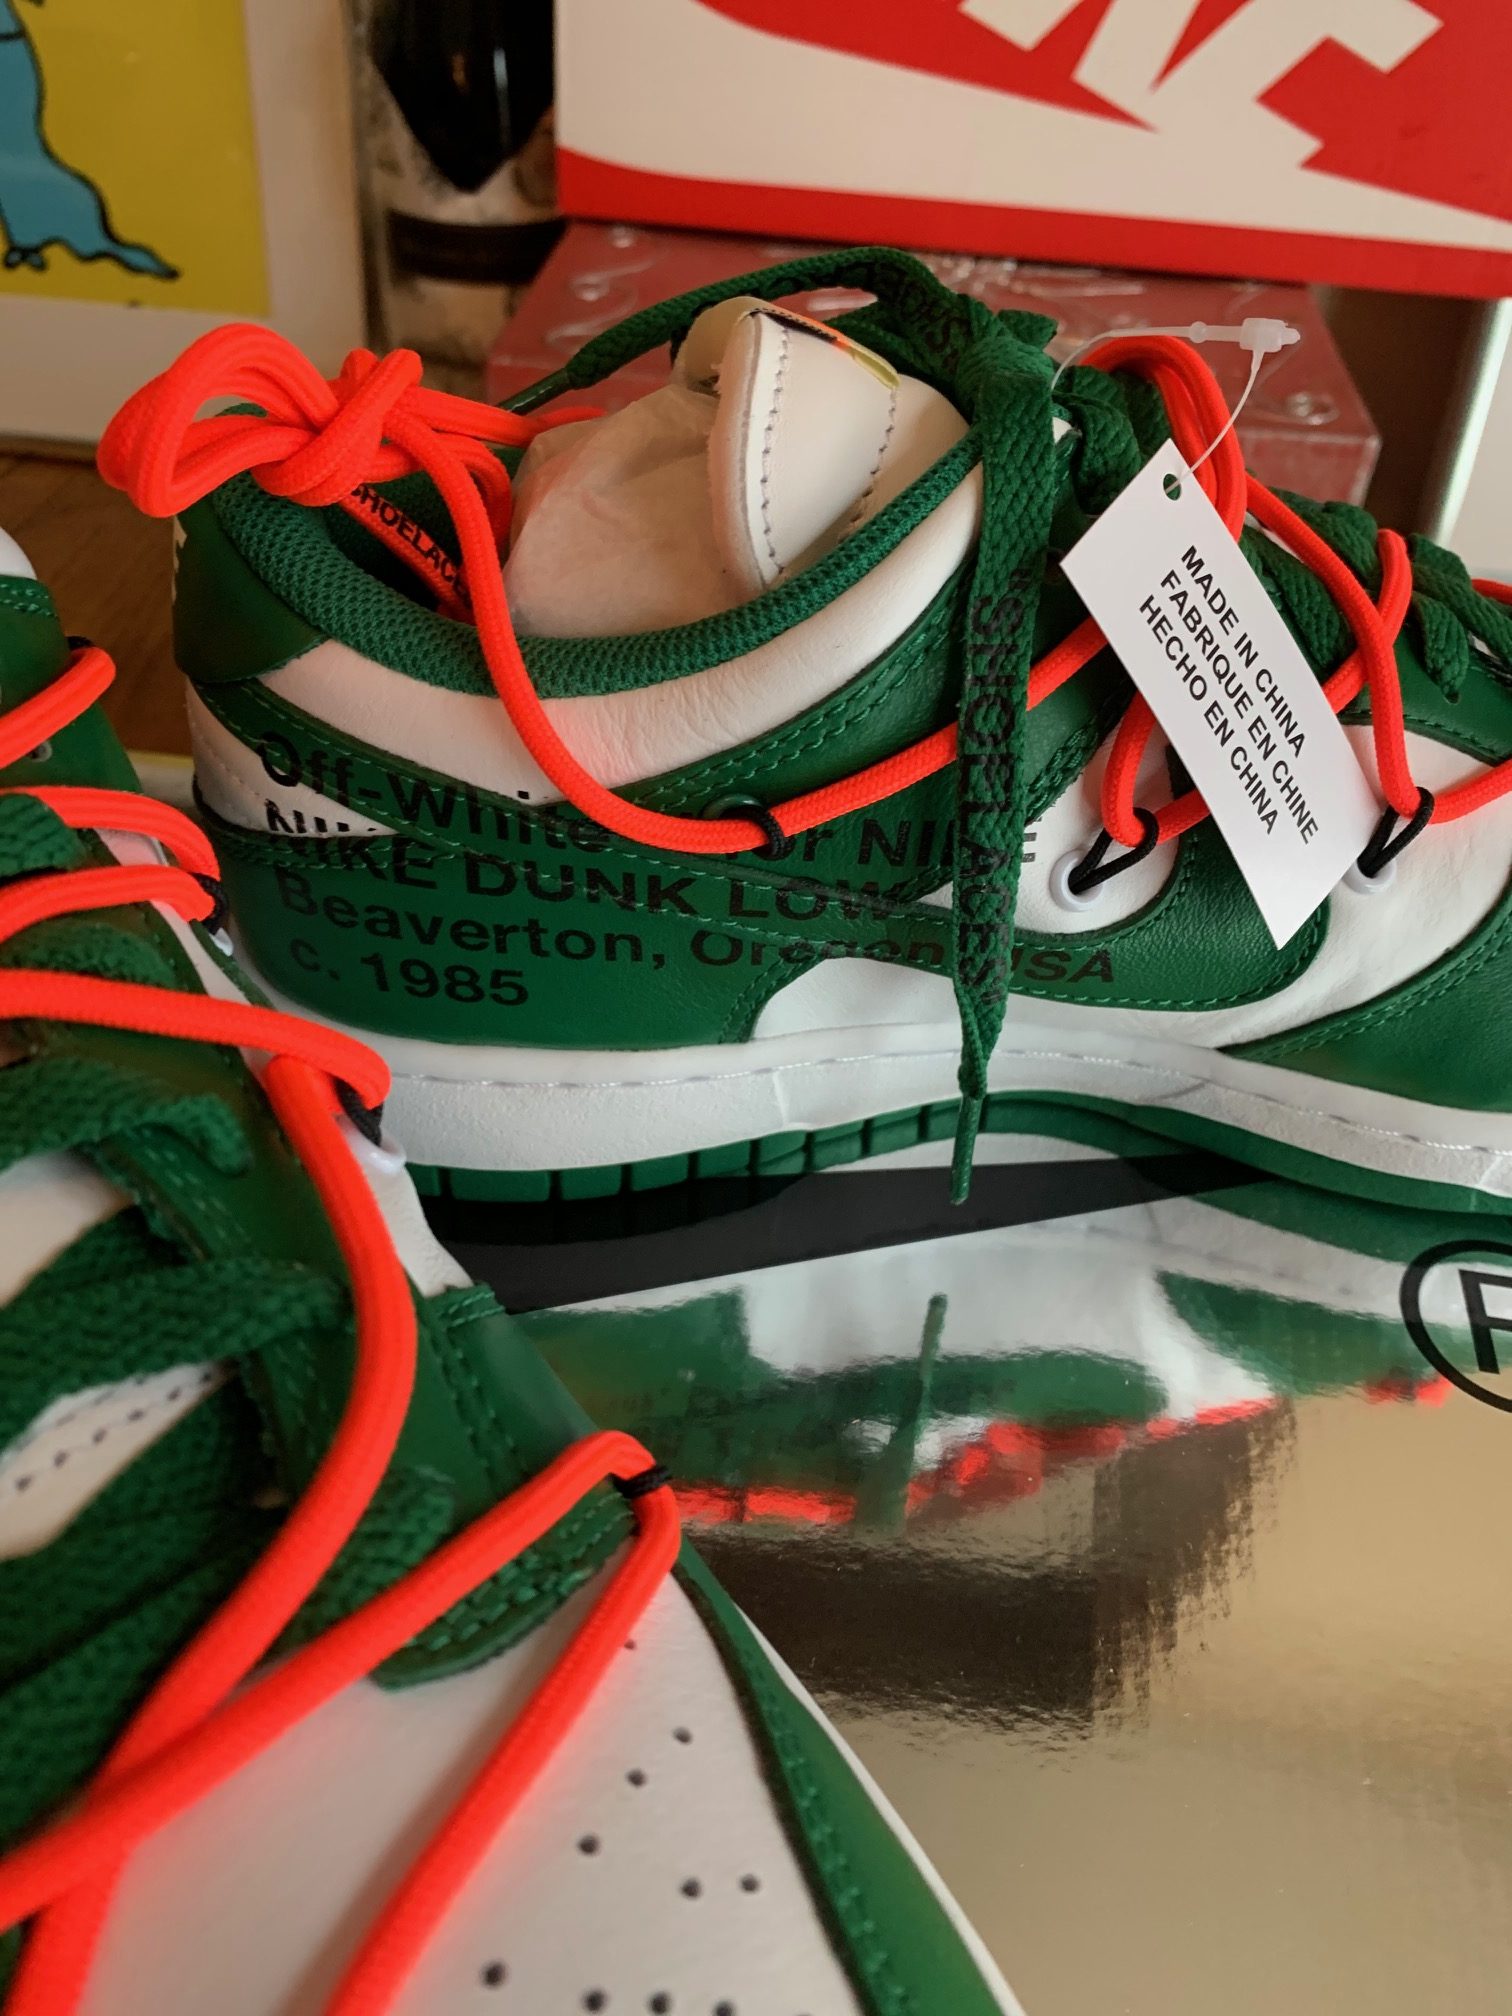 I Sold Pine Green Off White Dunks Sneakers for $400 Profit â NinthandSuperior